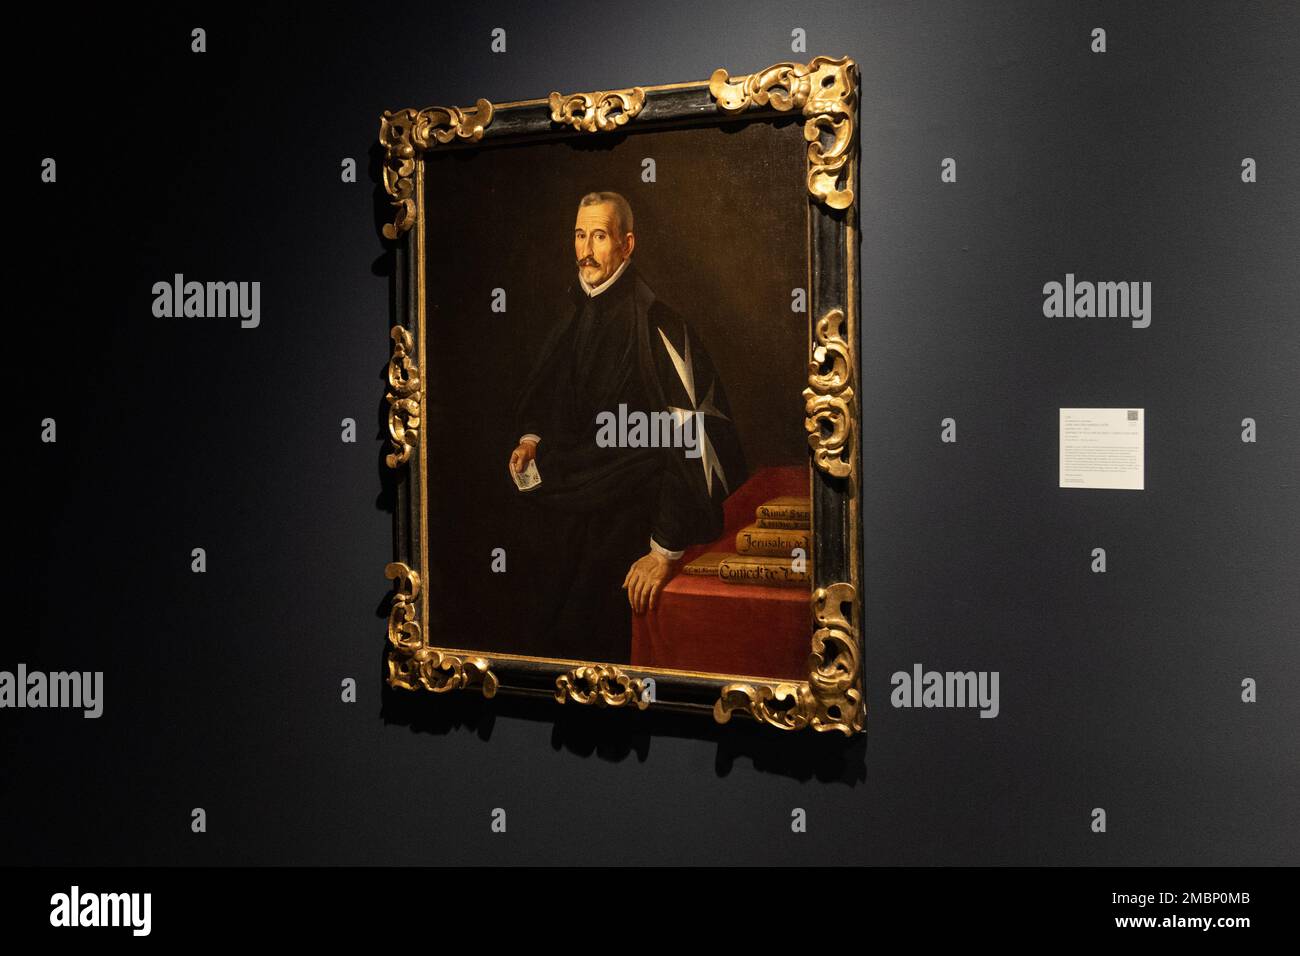 'Portrait of Felix Lope de Vega y Carpio' by Juan van der Hamen y Leon is up for auction at Masters Week at Sotheby's seen during press preview in New York on January 20, 2023 Stock Photo